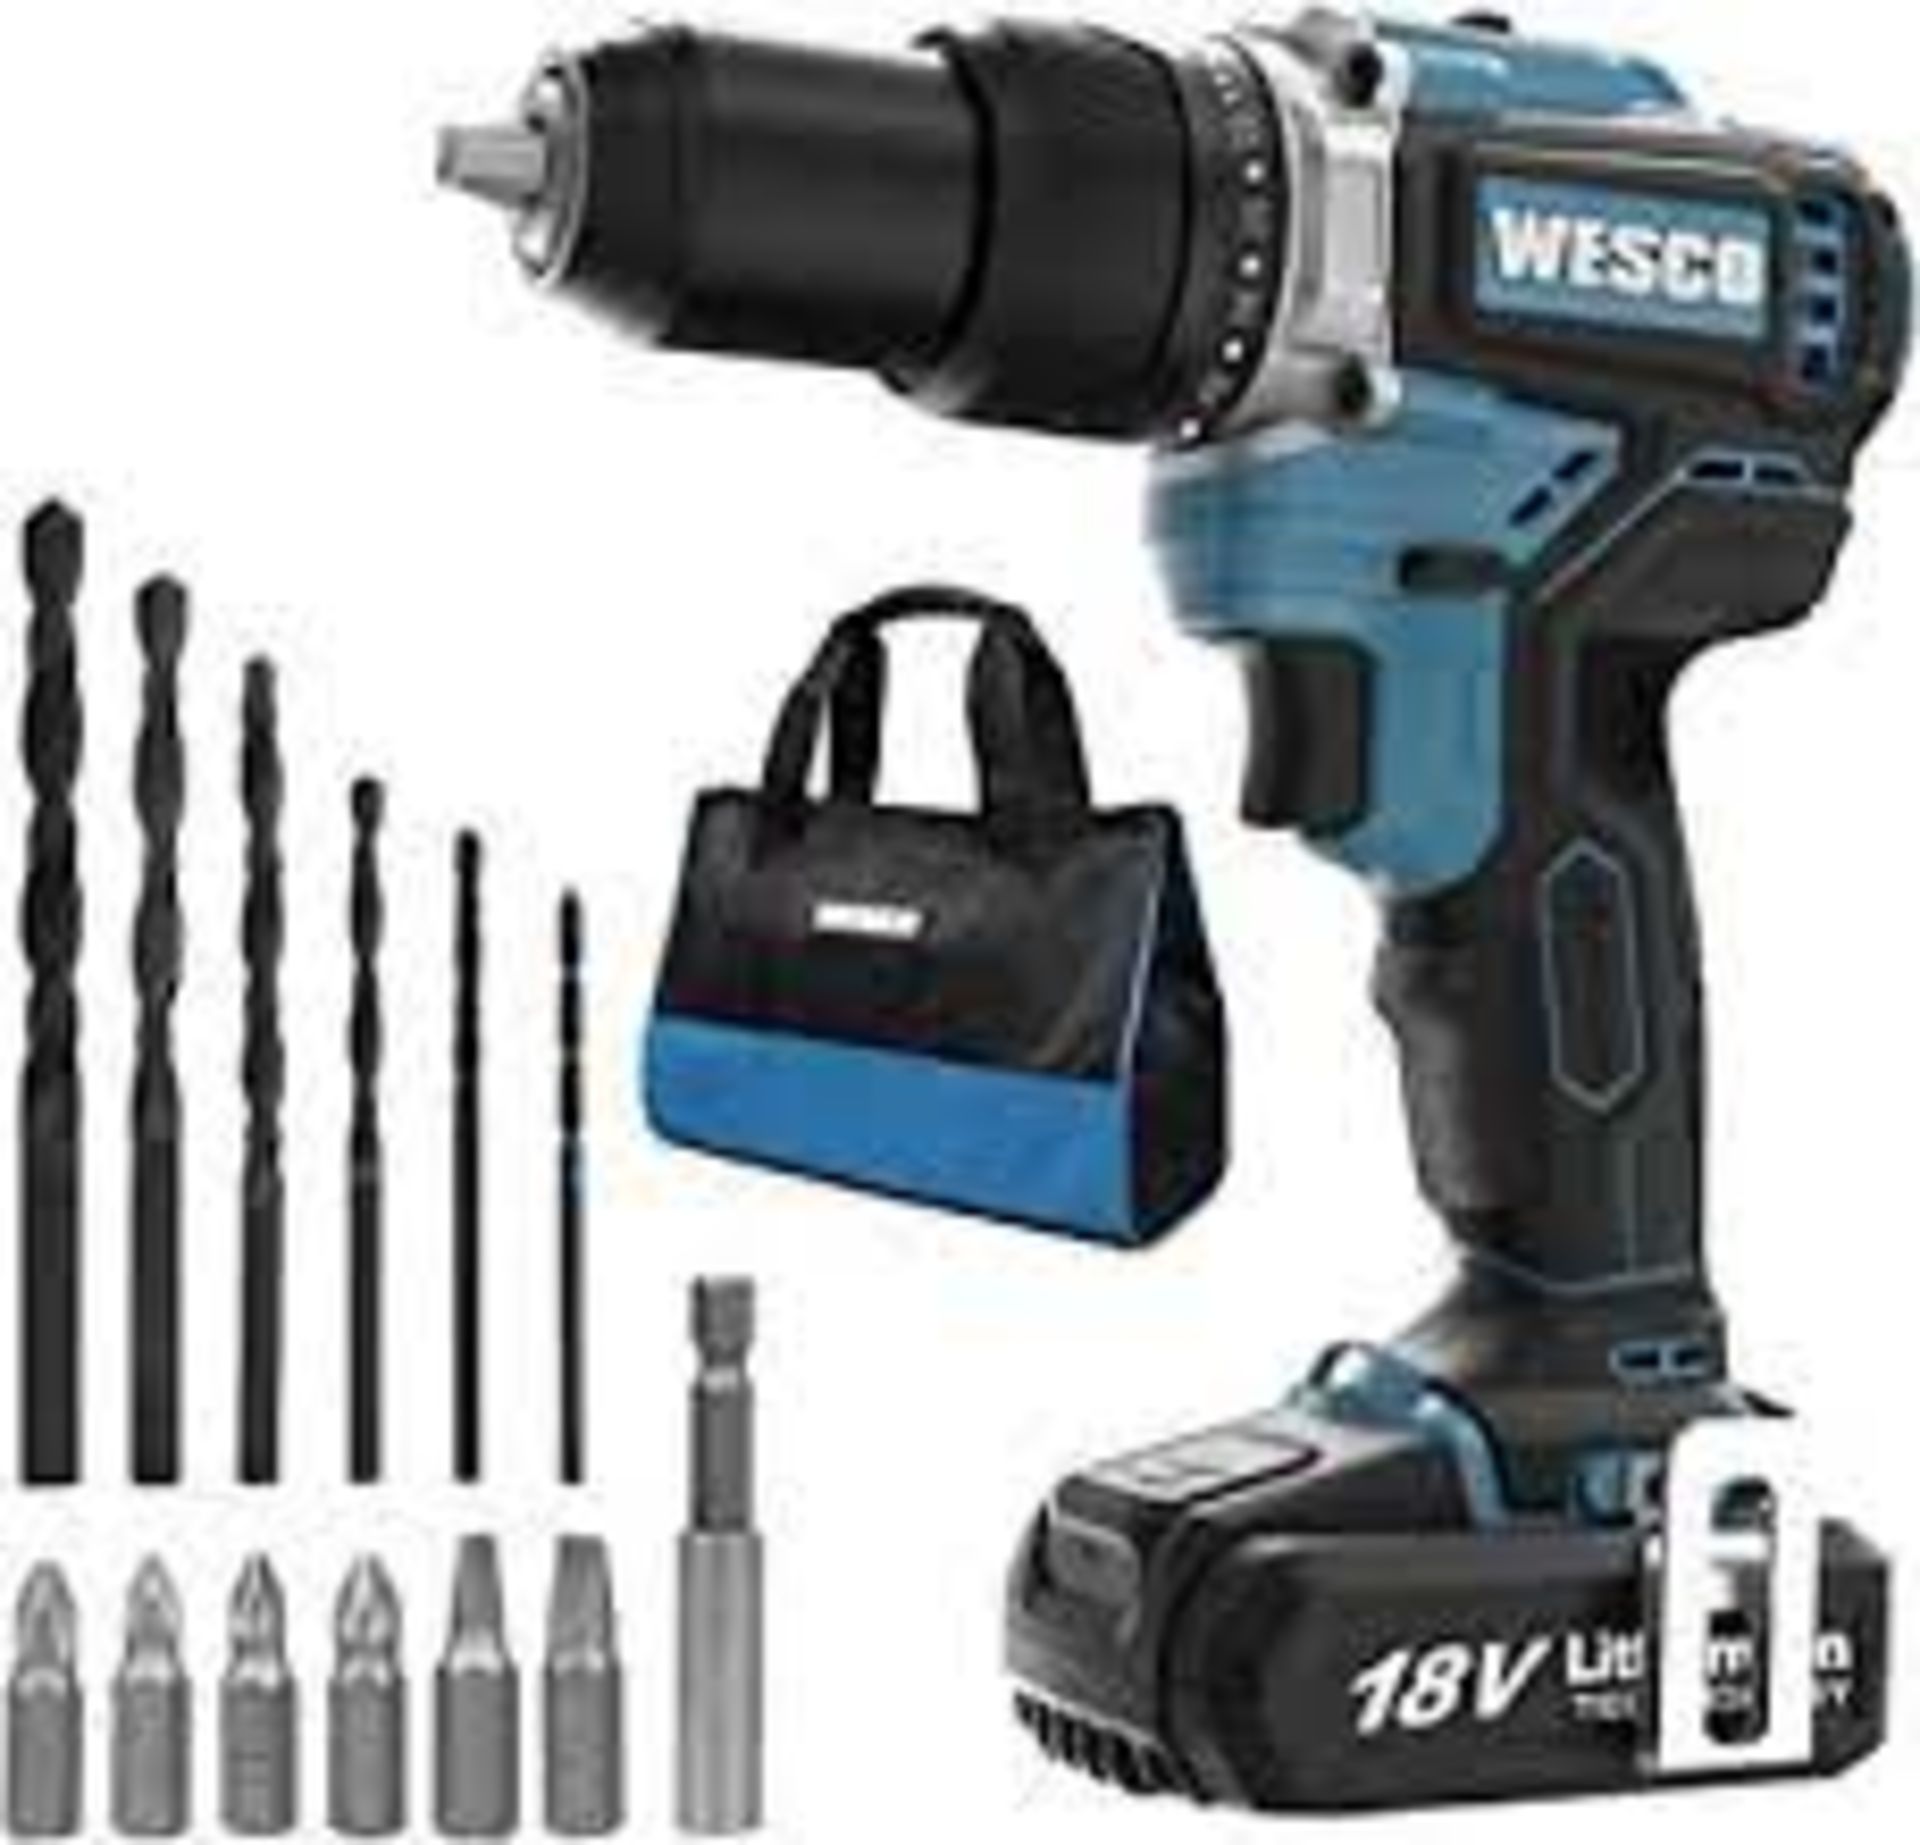 New Boxed WESCO 18V 2.0Ah Power Combi Drill Kit with Li-ion Battery and Charger, Electric